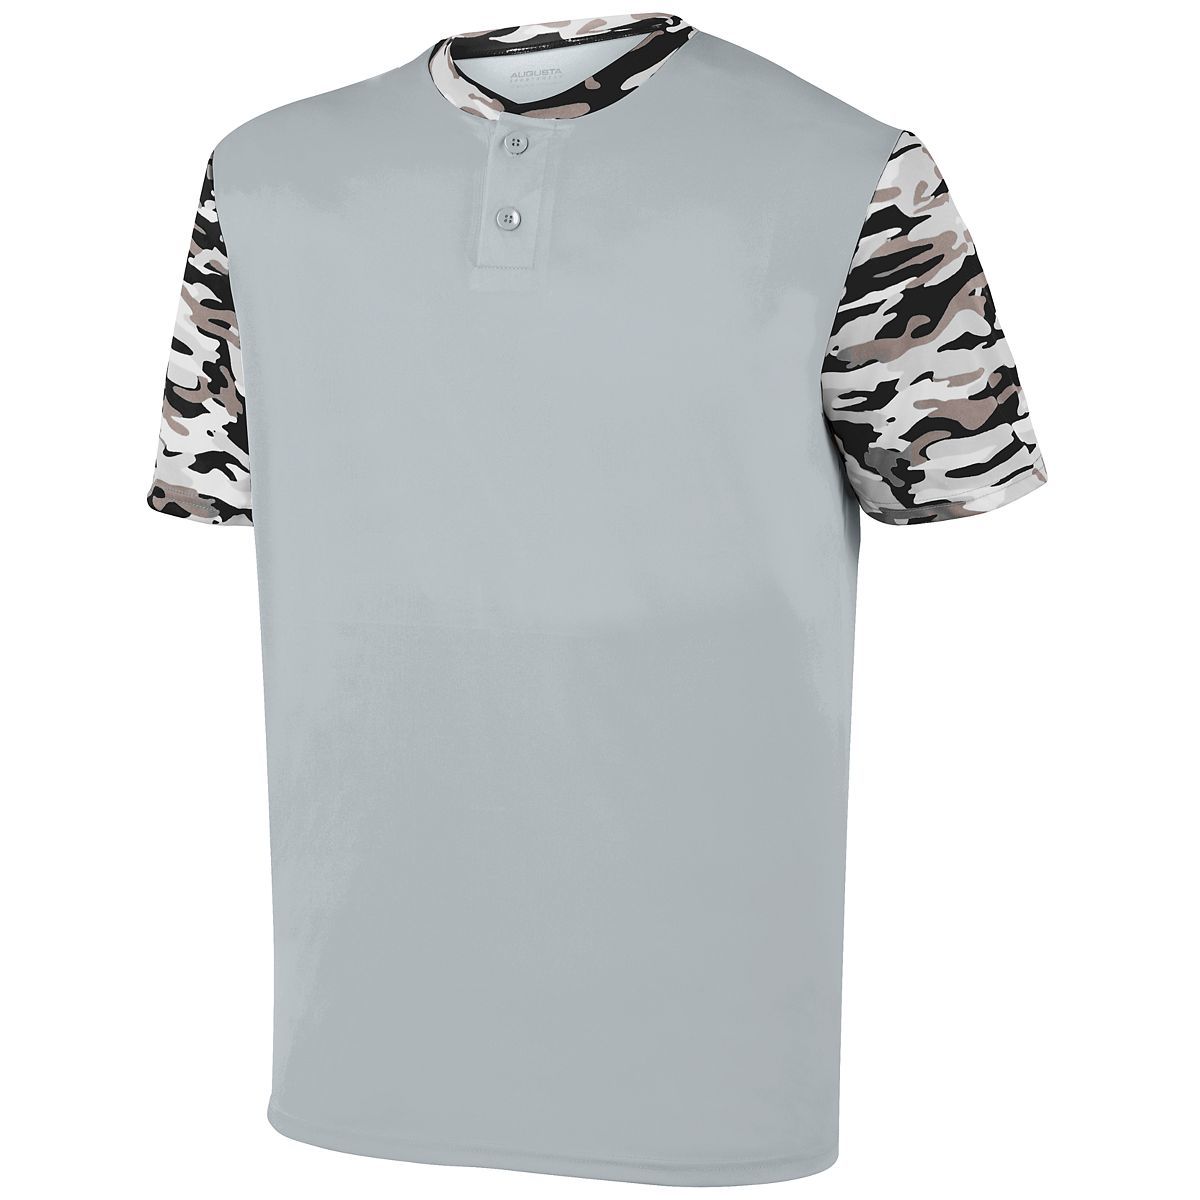 Augusta Sportswear Youth Pop Fly Jersey in Silver/Black Mod  -Part of the Youth, Youth-Jersey, Augusta-Products, Baseball, Shirts, All-Sports, All-Sports-1 product lines at KanaleyCreations.com